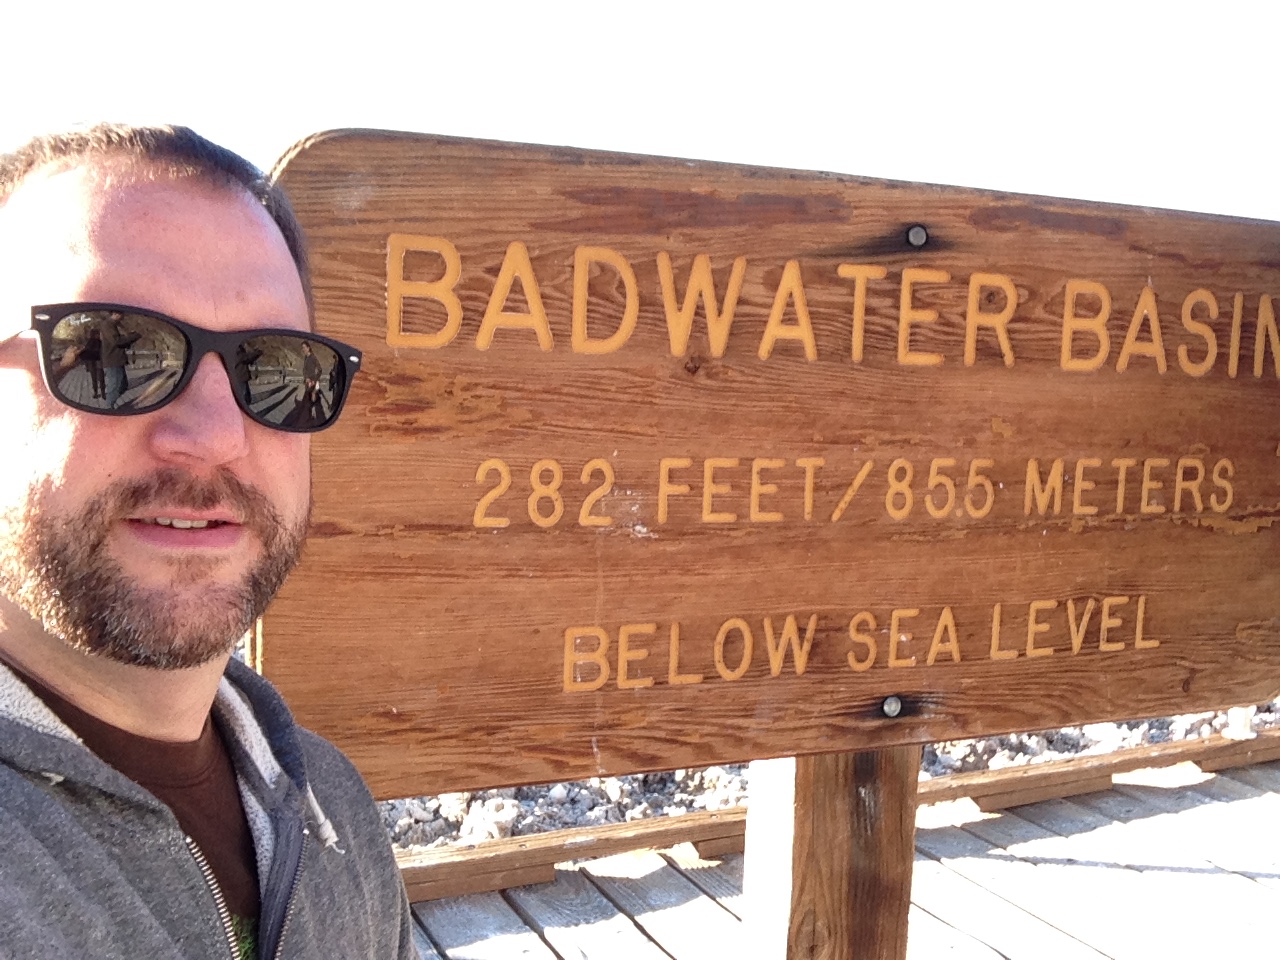 Badwater Basin, the lowest point in the USA.